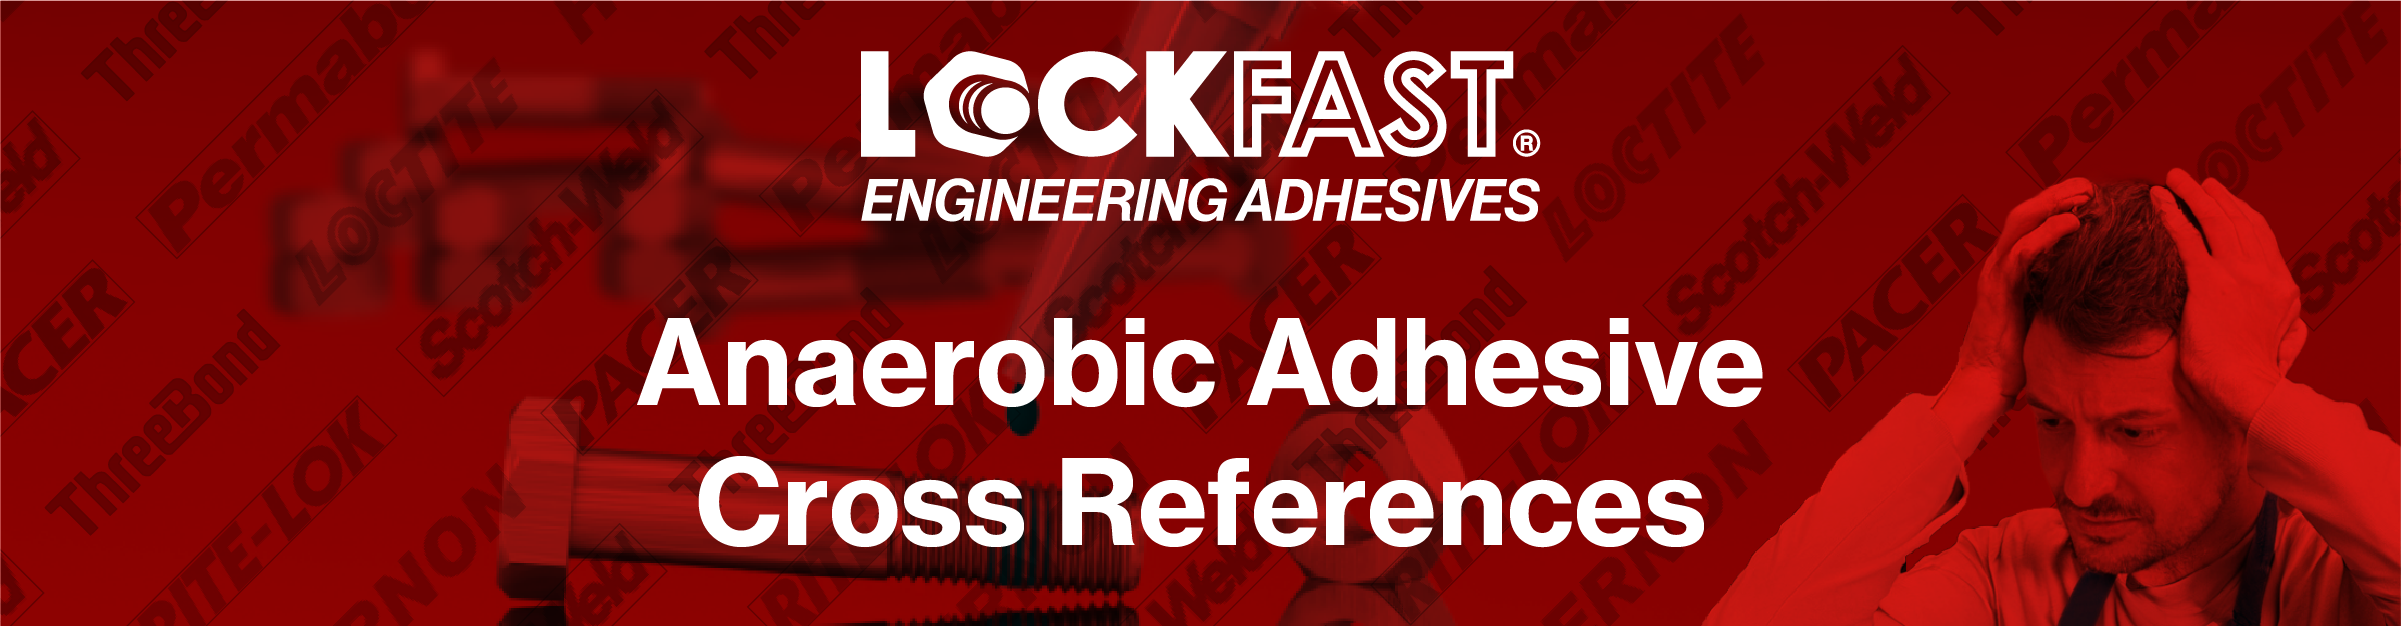 Anaerobic Adhesive Cross References Banner